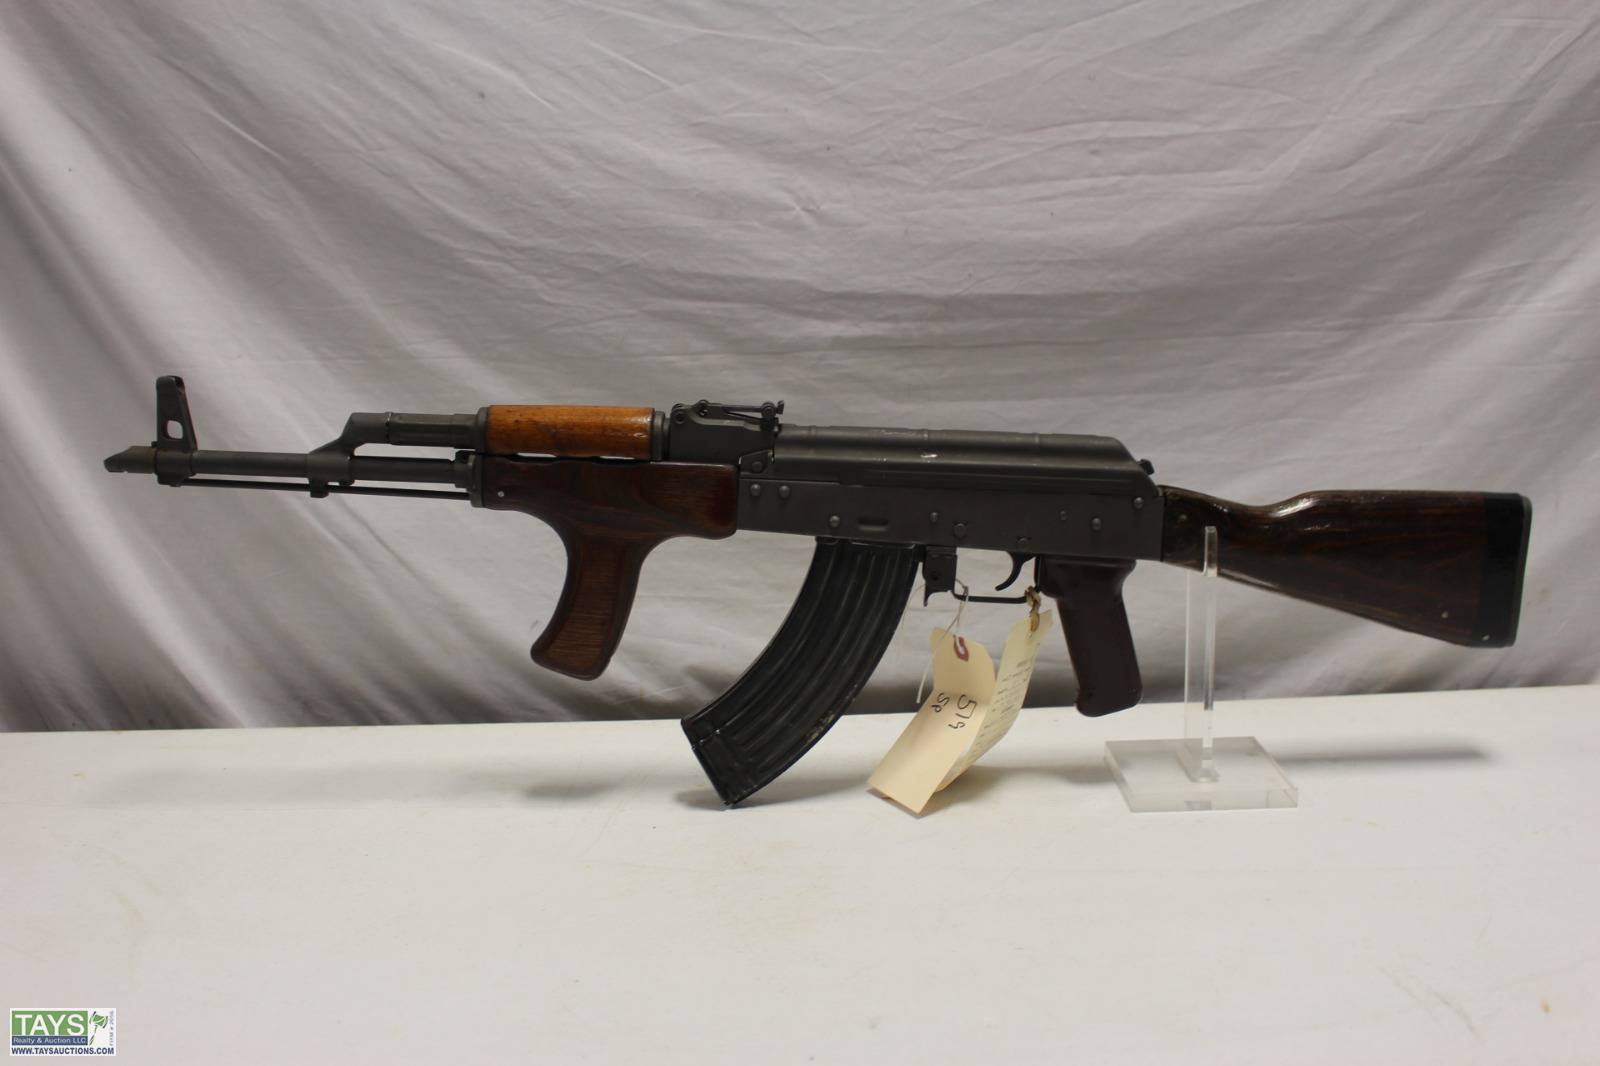 ONLINE ABSOLUTE AUCTION: 55± CONFISCATED FIREARMS FROM THE CITY OF SPARTA POLICE DEPARTMENT